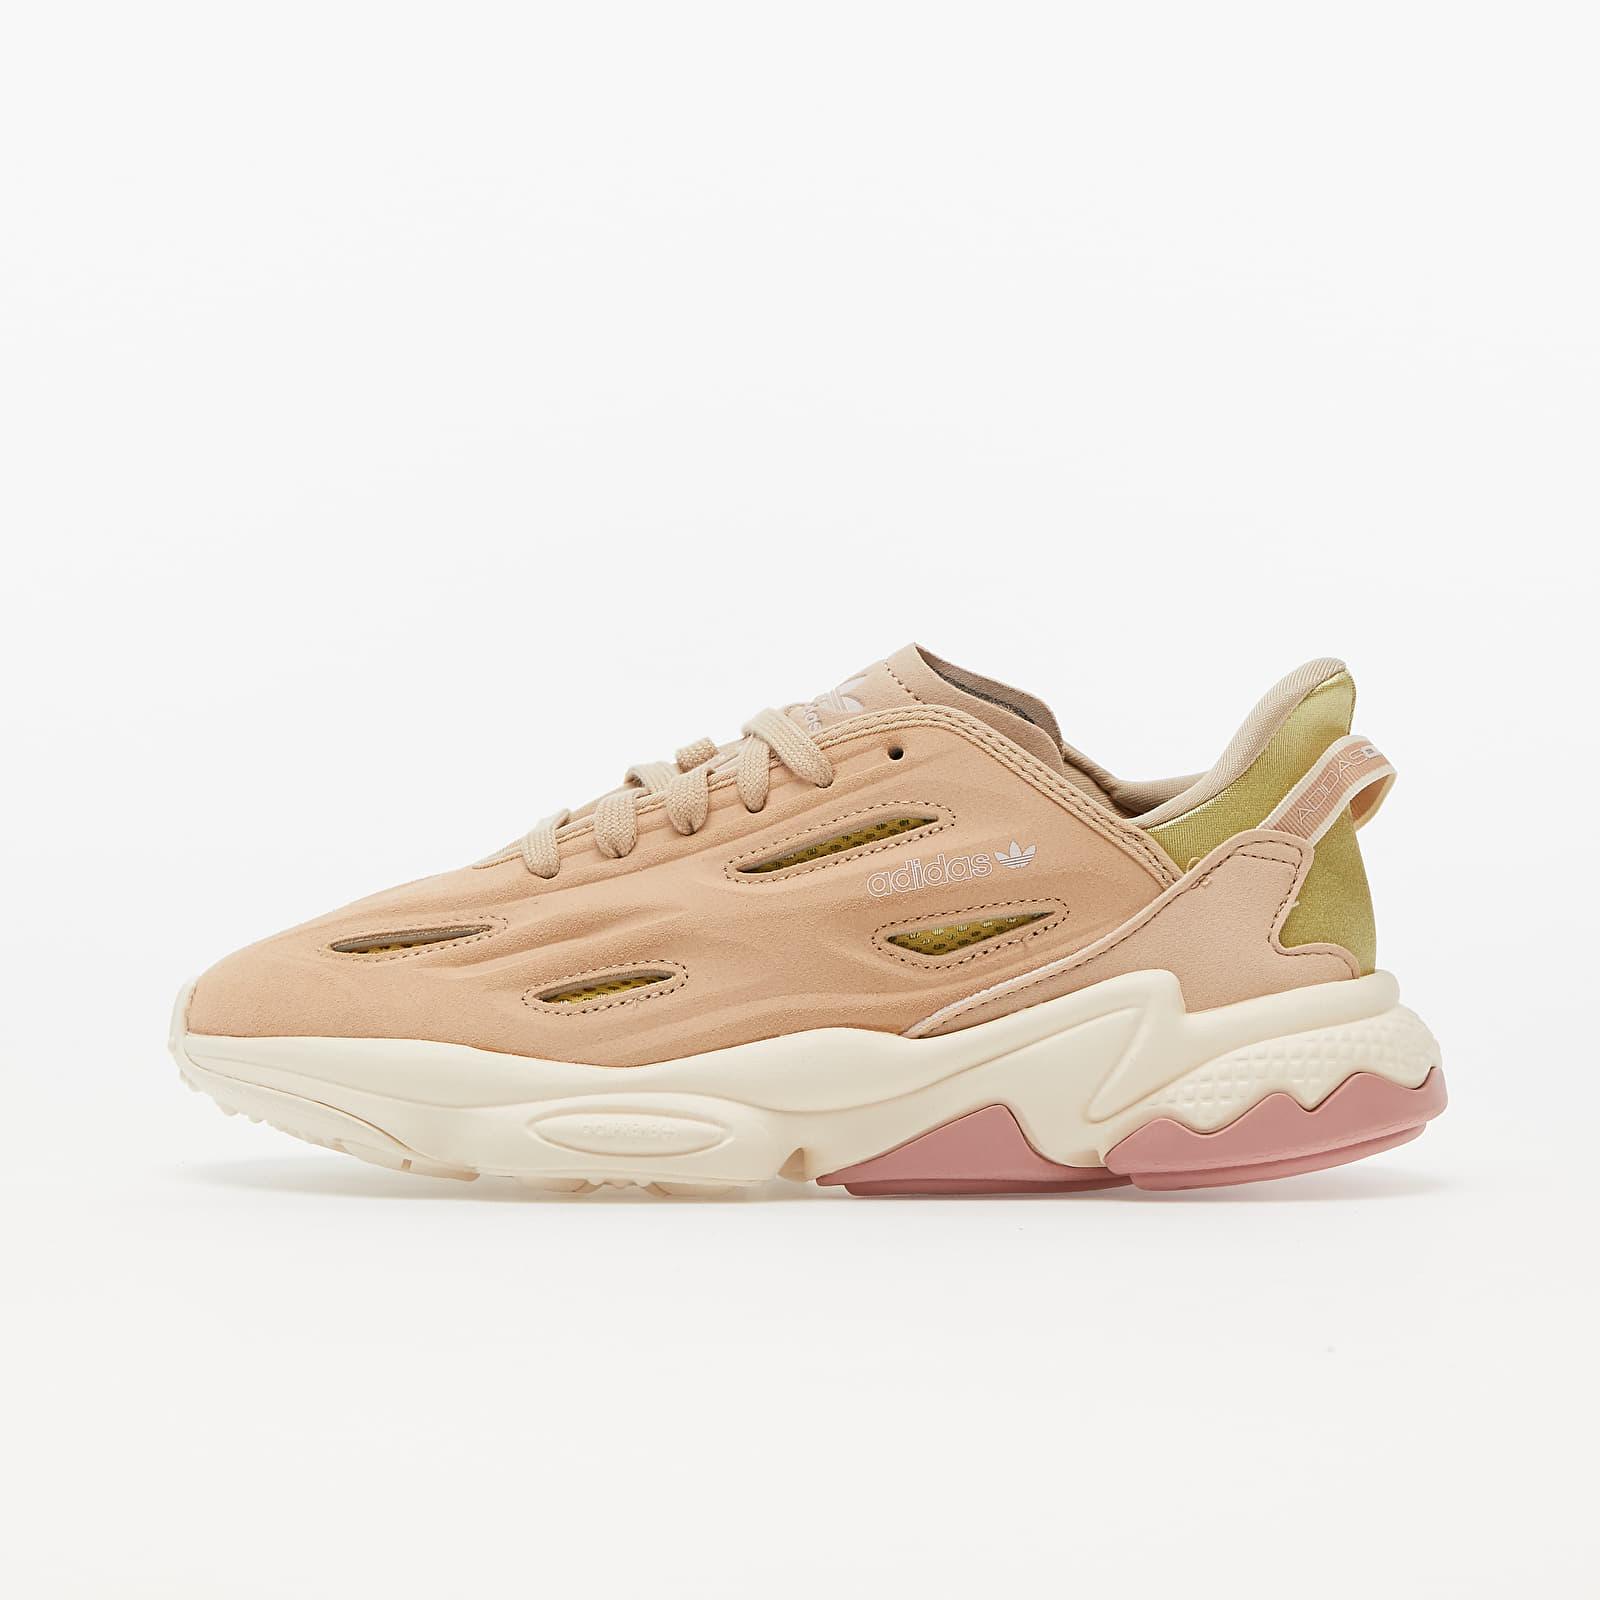 adidas Originals Adidas Ozweego Celox Nude/ Pale Pink W White/ Natural Worn | Clear St in Lyst